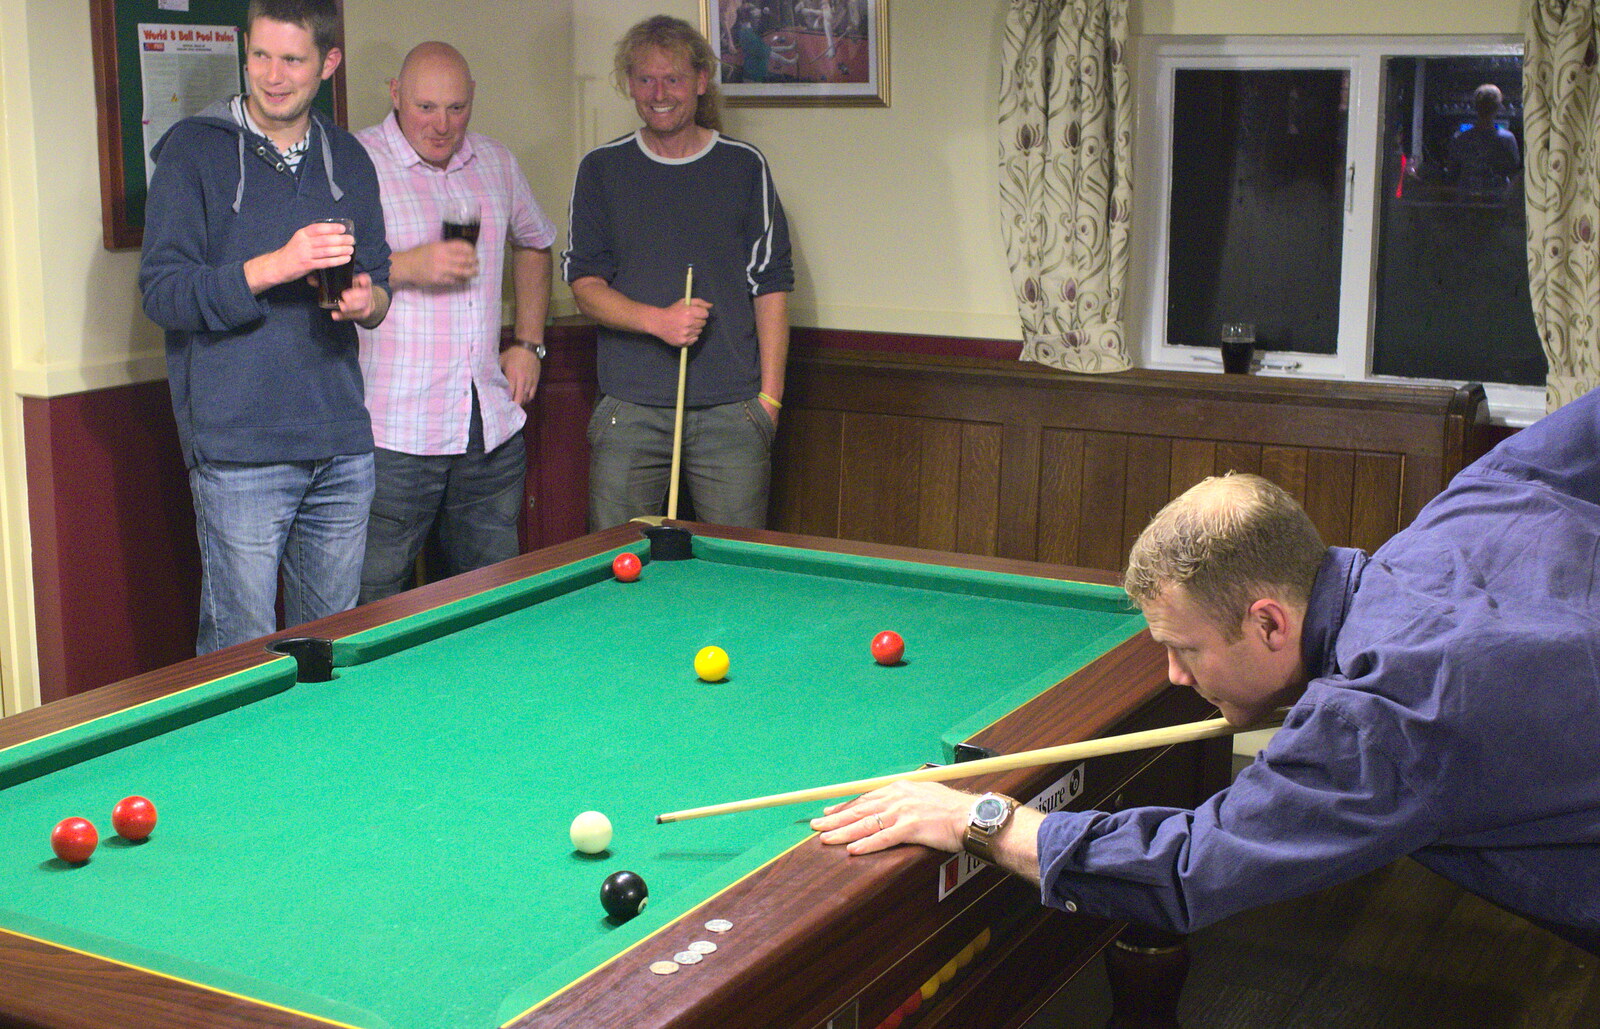 Mikey P takes a shot from Stick Game at the Cross Keys, Redgrave, Suffolk - 20th July 2012